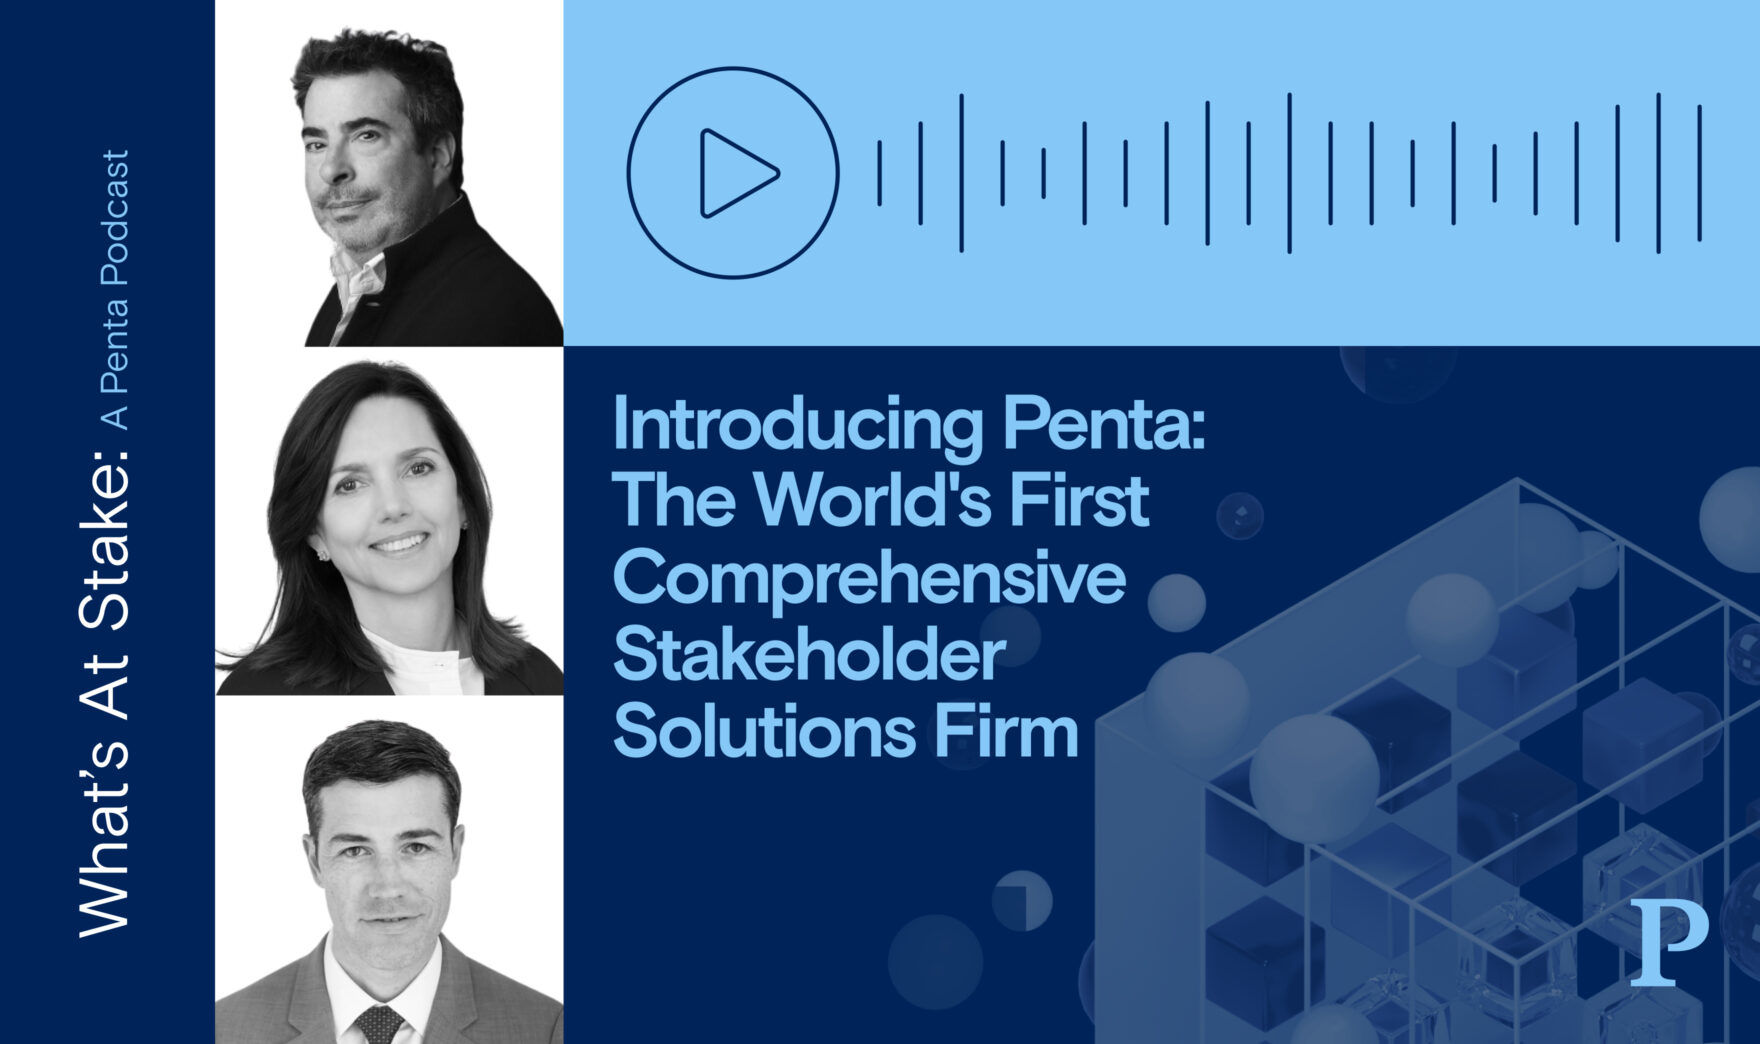 Introducing Penta: The World’s First Comprehensive Stakeholder Solutions Firm